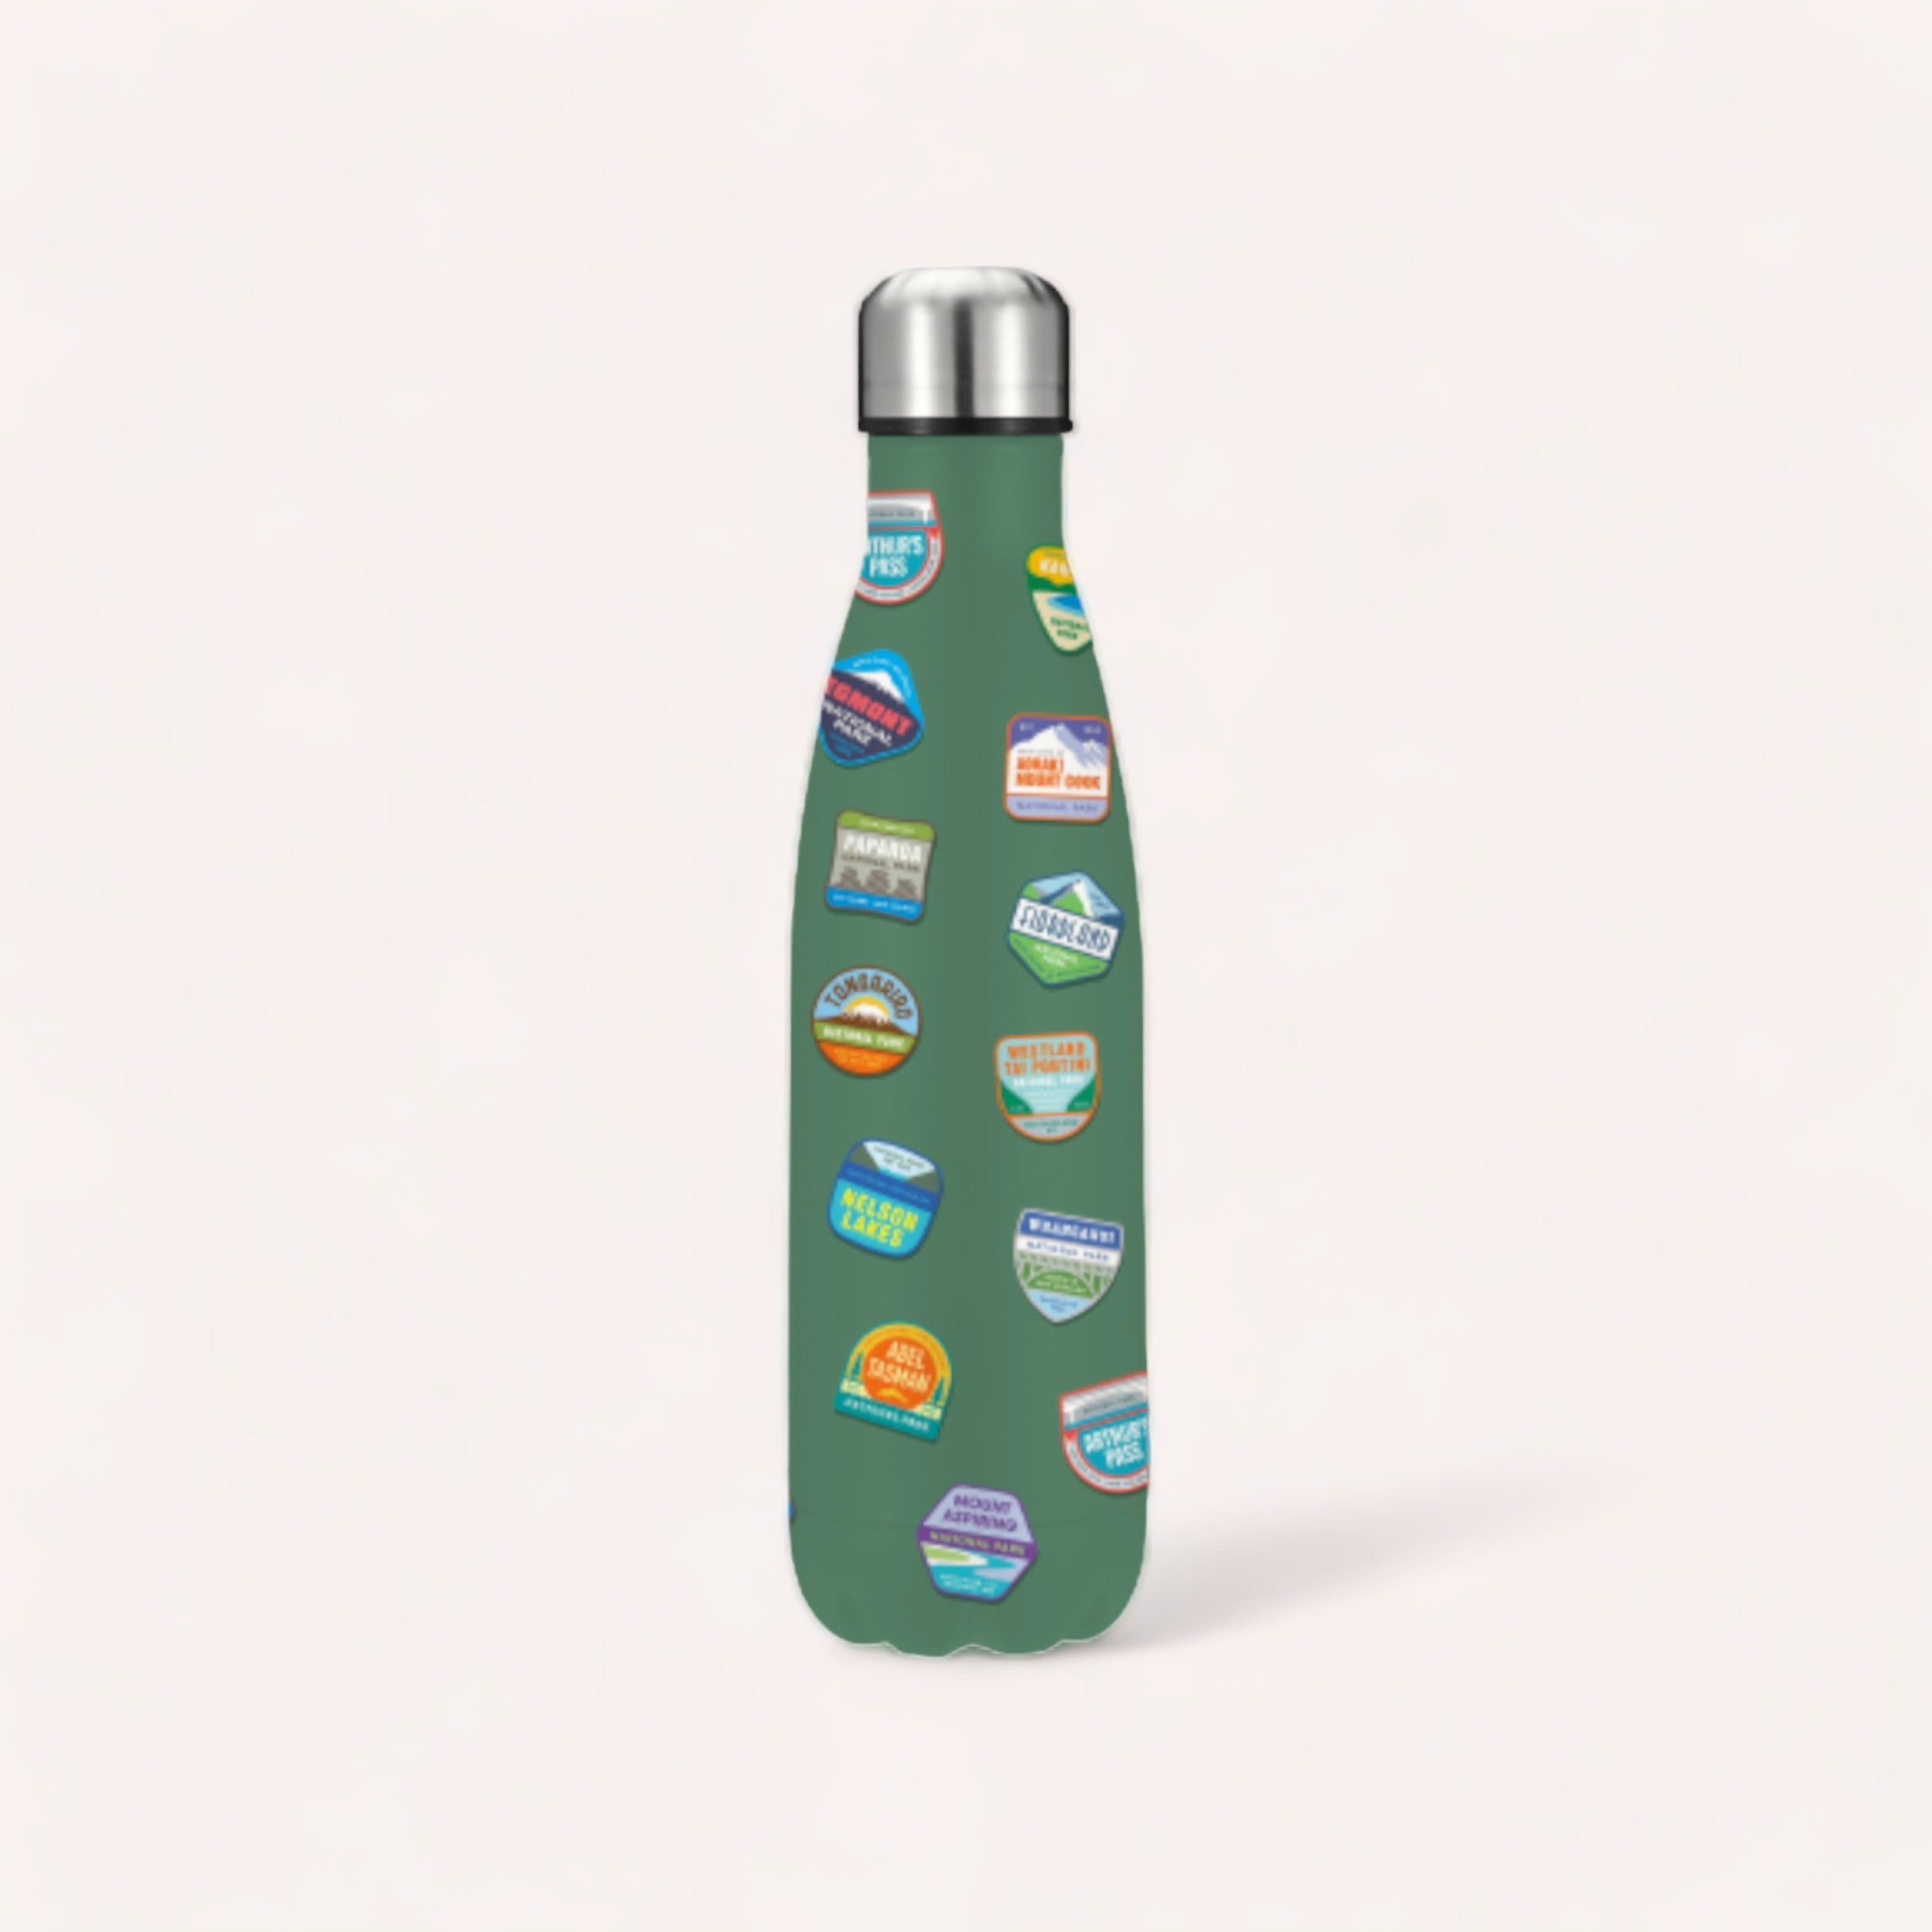 A National Parks stainless steel water bottle adorned with a variety of colorful sticker designs featuring New Zealand Parks and Glenn Jones Art against a neutral background by Glenn Jones Accessories.